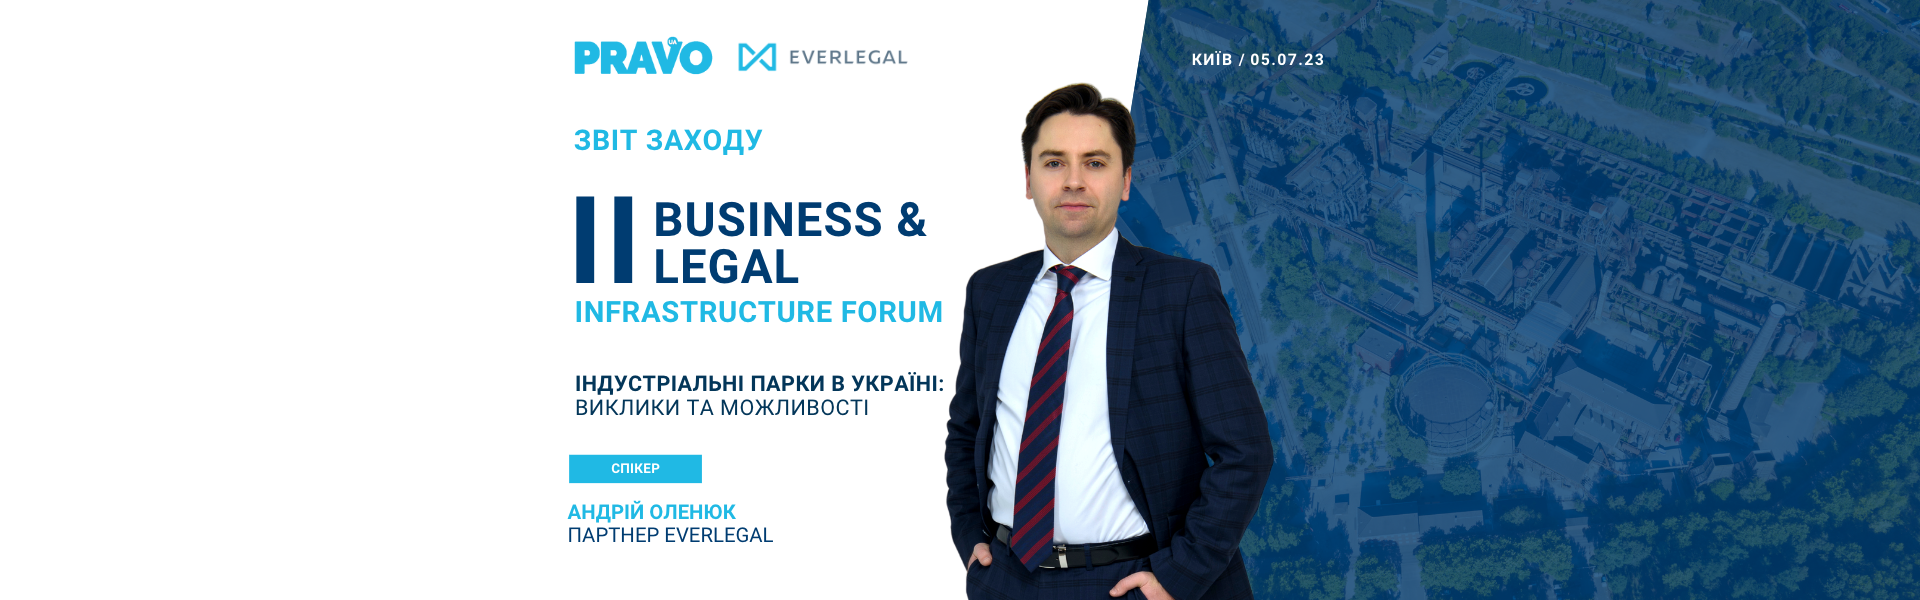 At the II Business & Legal Infrastructure Forum, EVRLEGAL partner presented the potential benefits of industrial parks in the role of Ukraine's recovery